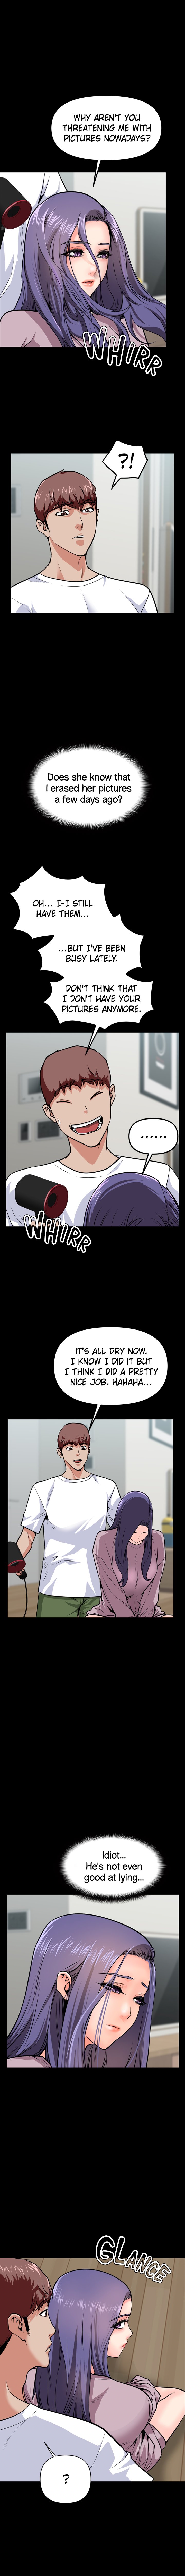 Wrath of the Underdog - Chapter 18 Page 4